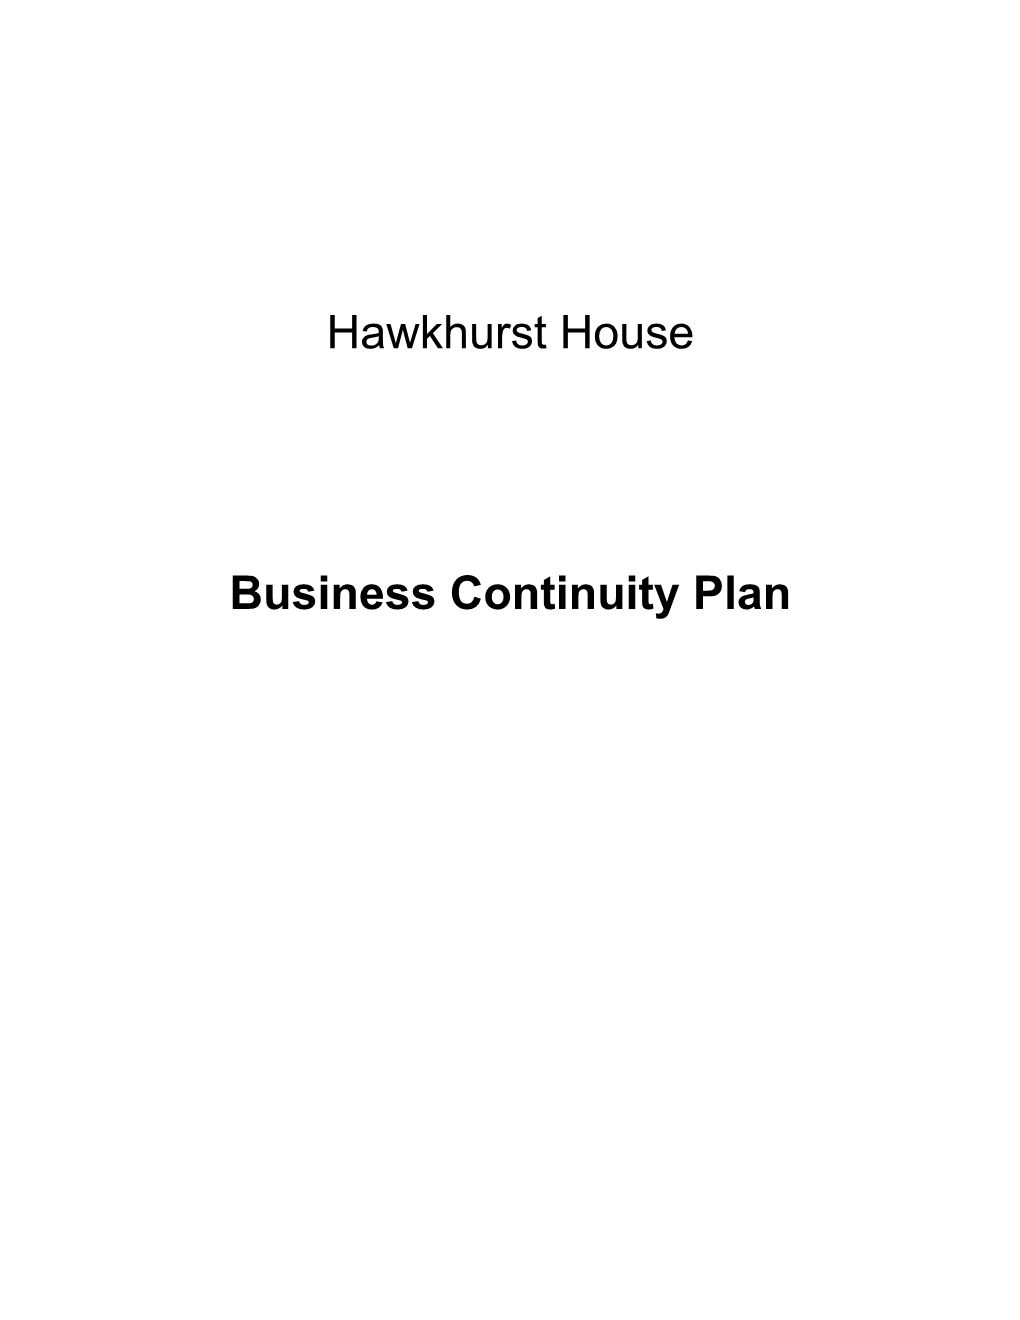 Business Continuity Plan s5